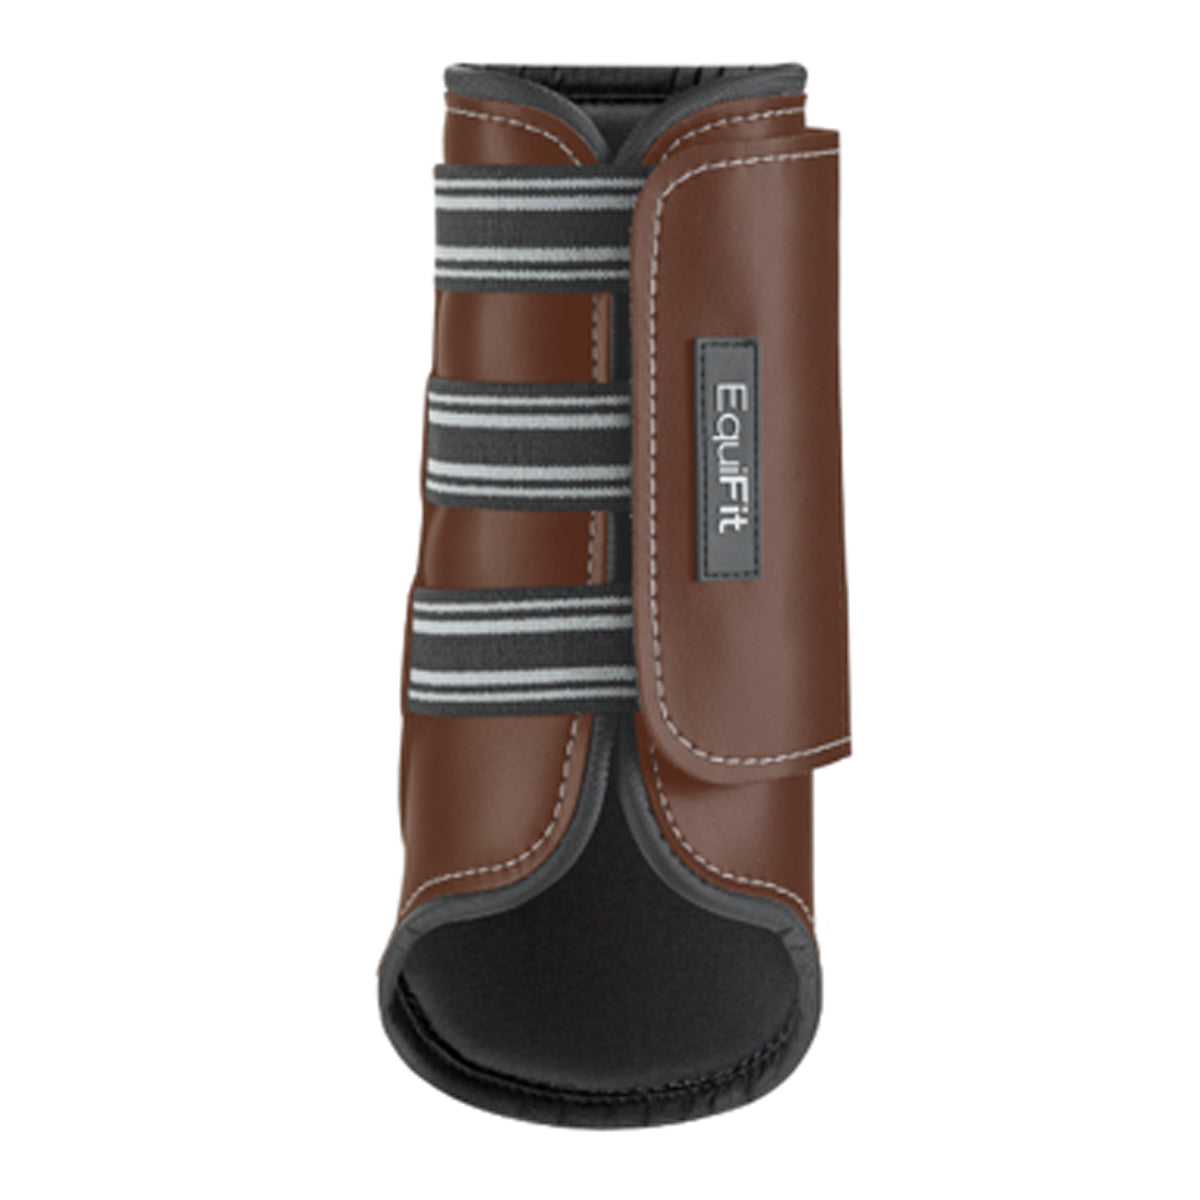 Equifit MultiTeq Tall Hind Boot